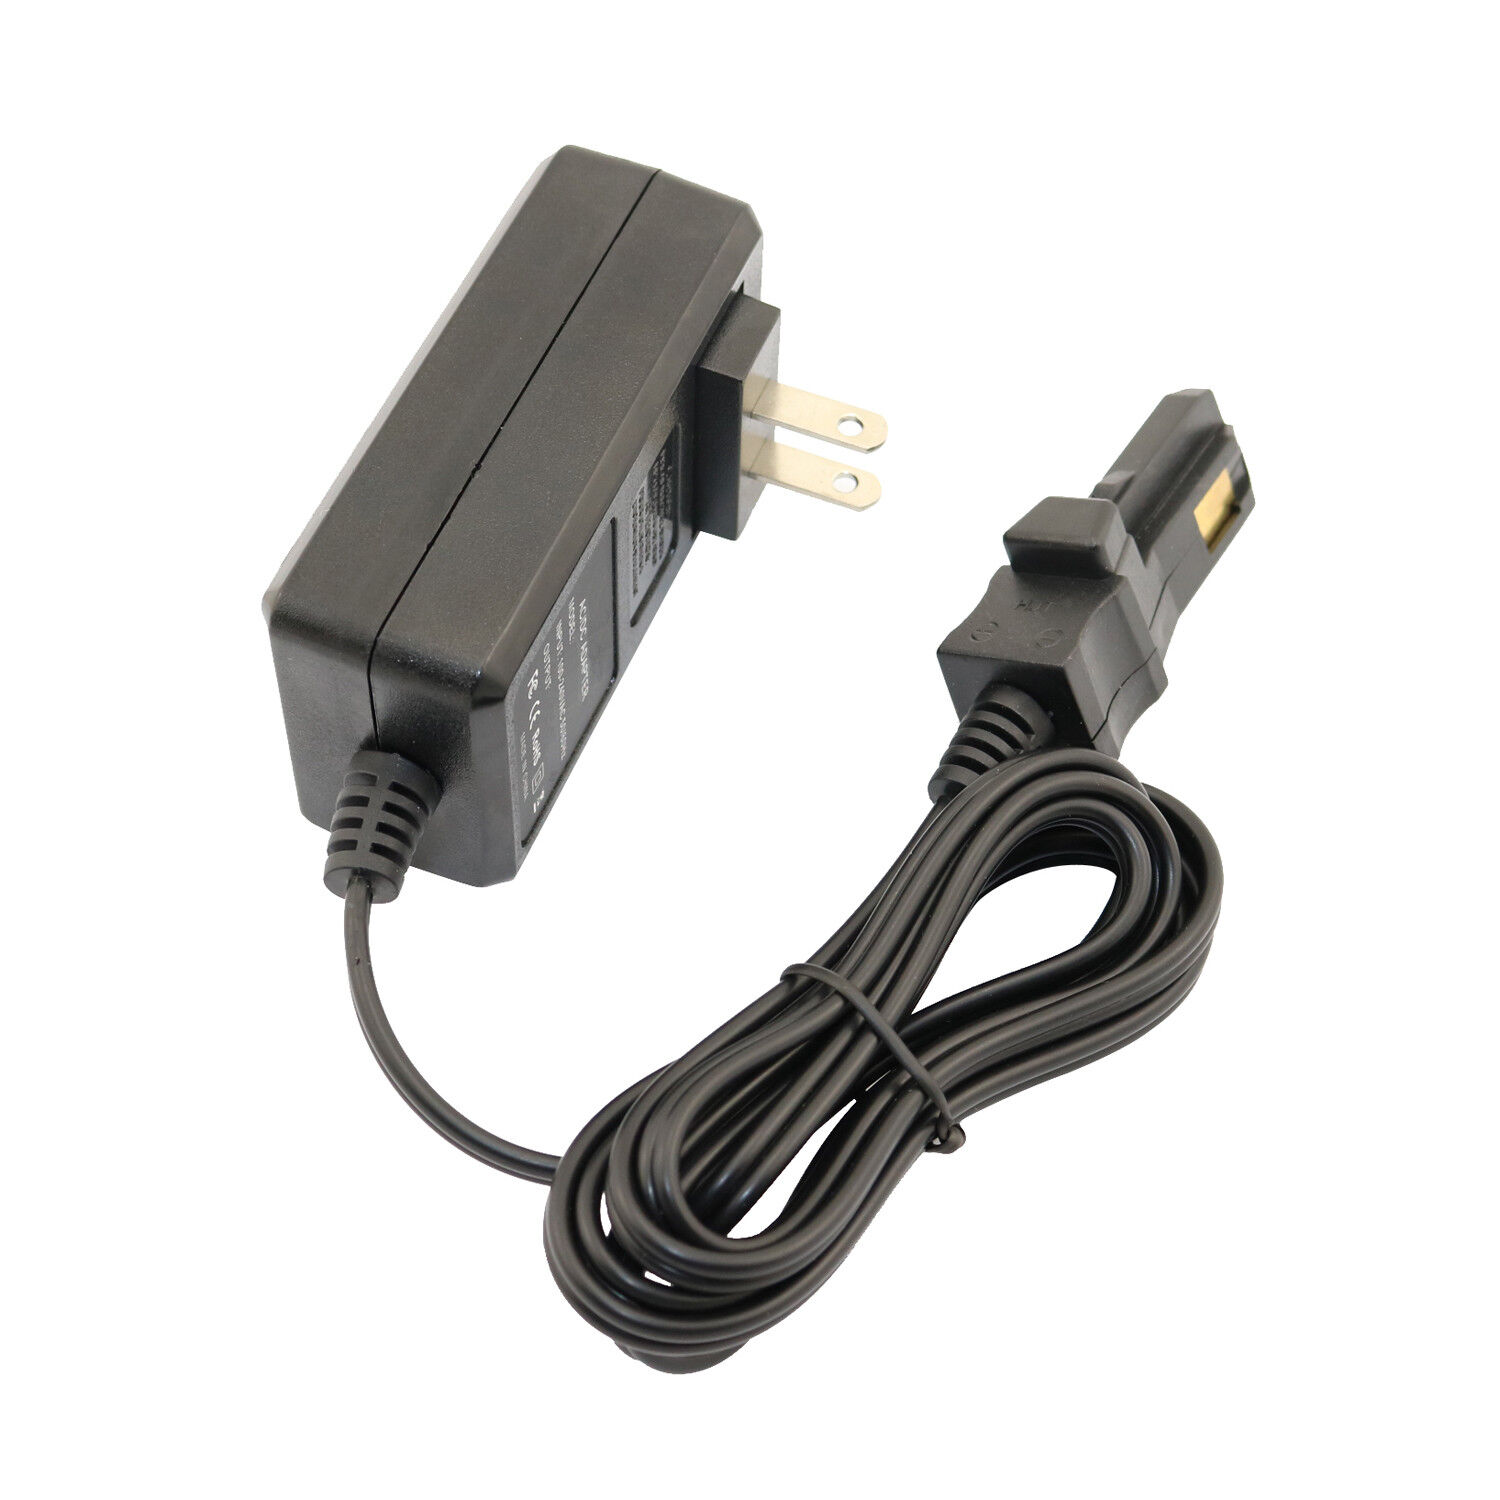 AC/DC Adapter Charger for Power Wheels L7820 Barbie Jammin Jeep AC/DC Adapter Charger for Power Wheels L7820 Barbie Jam